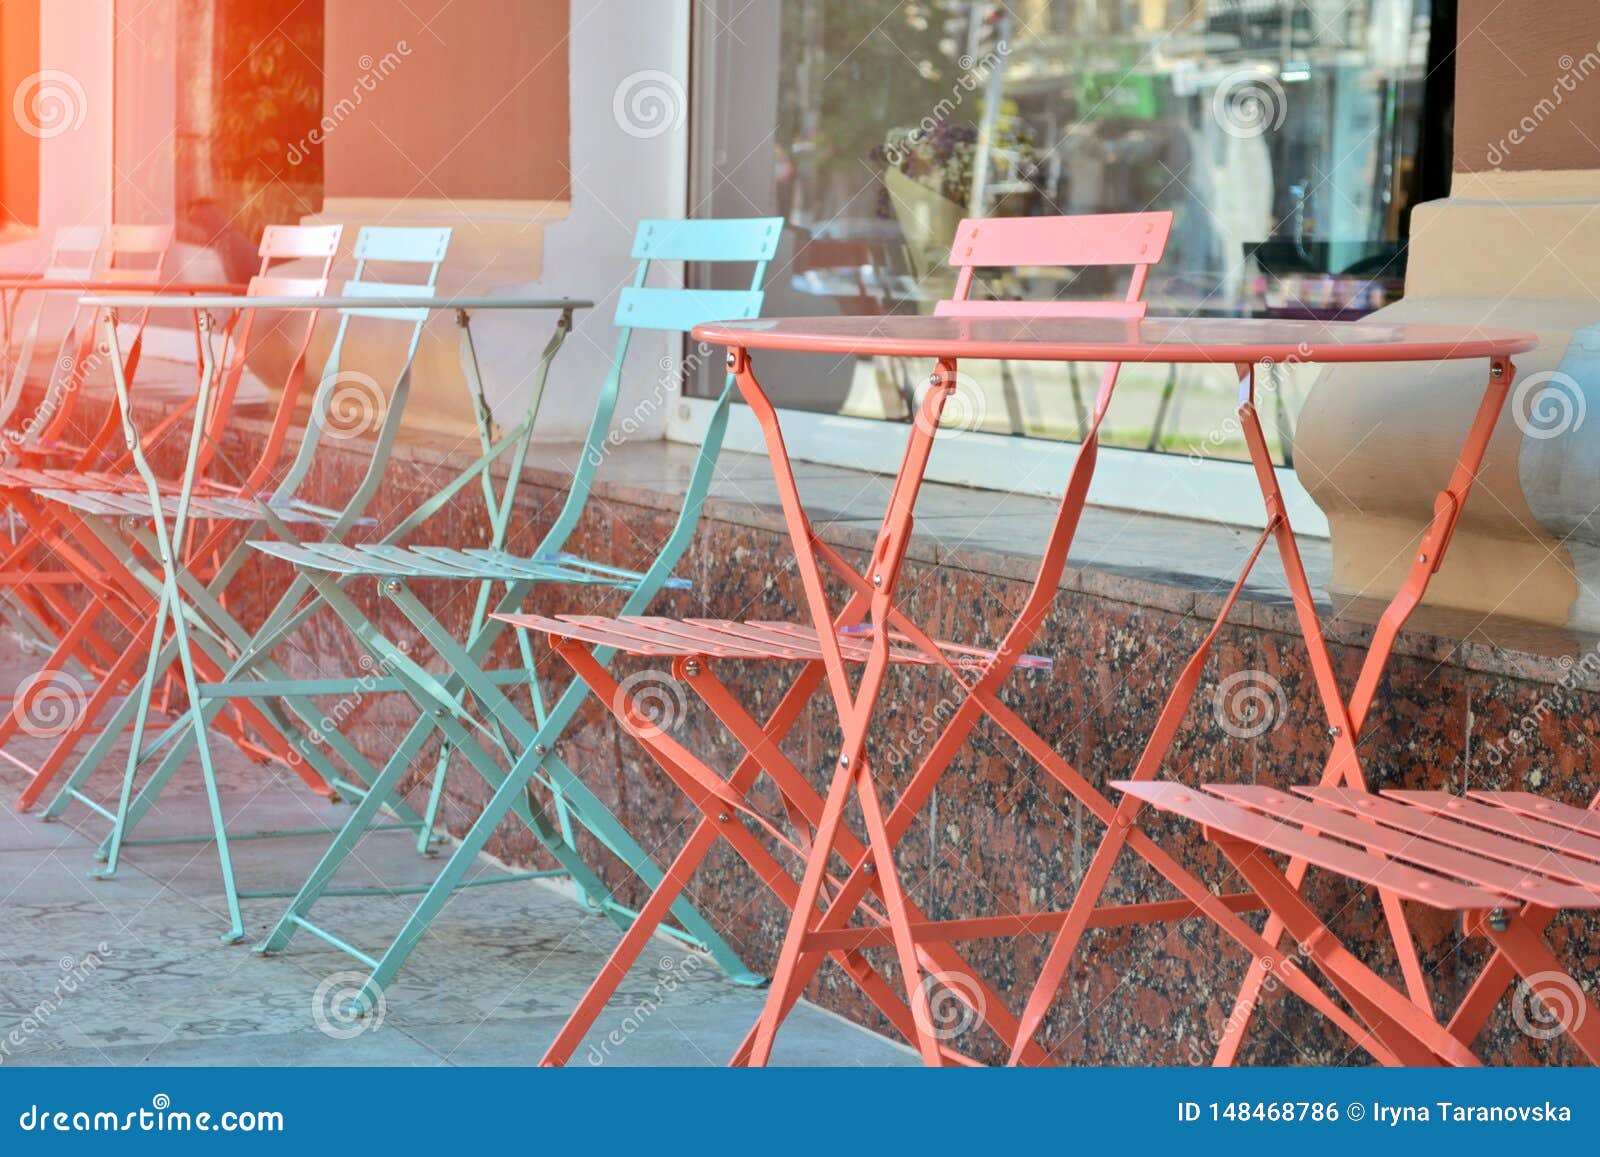 Summer Furniture Made Of Metal Near Cafe Blue And Coral Metal